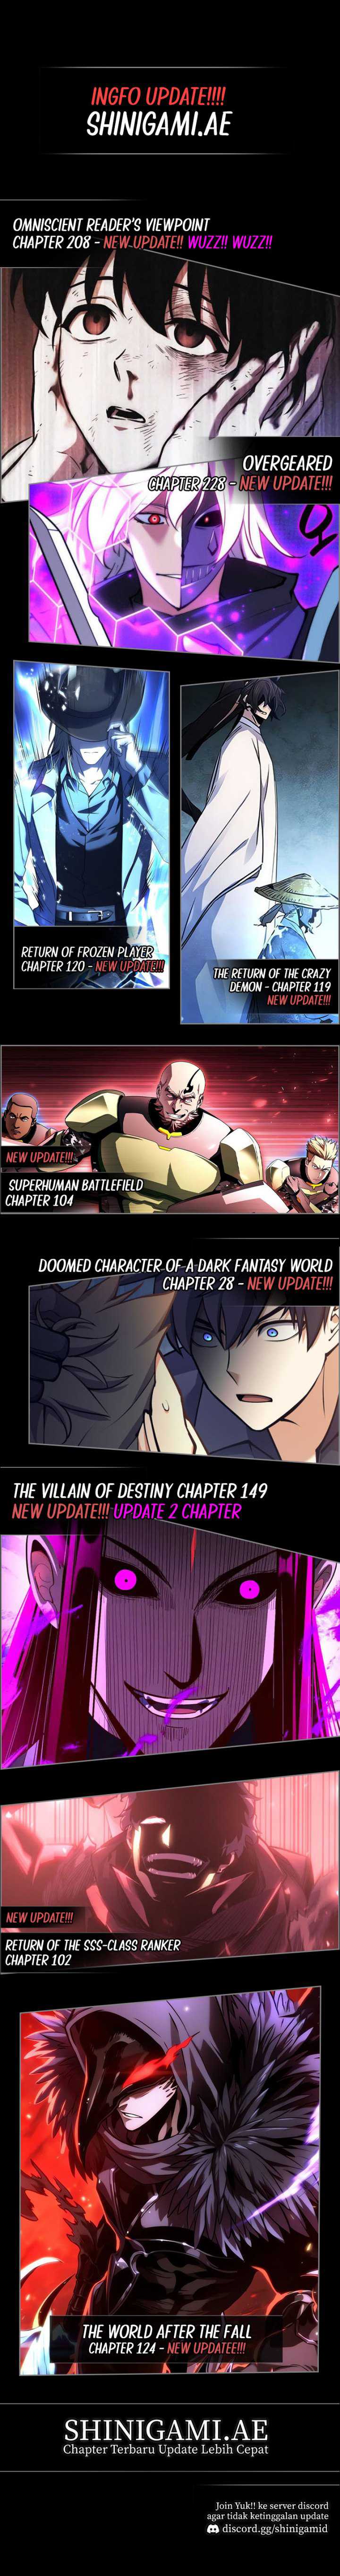 The Bully In Charge Chapter 97